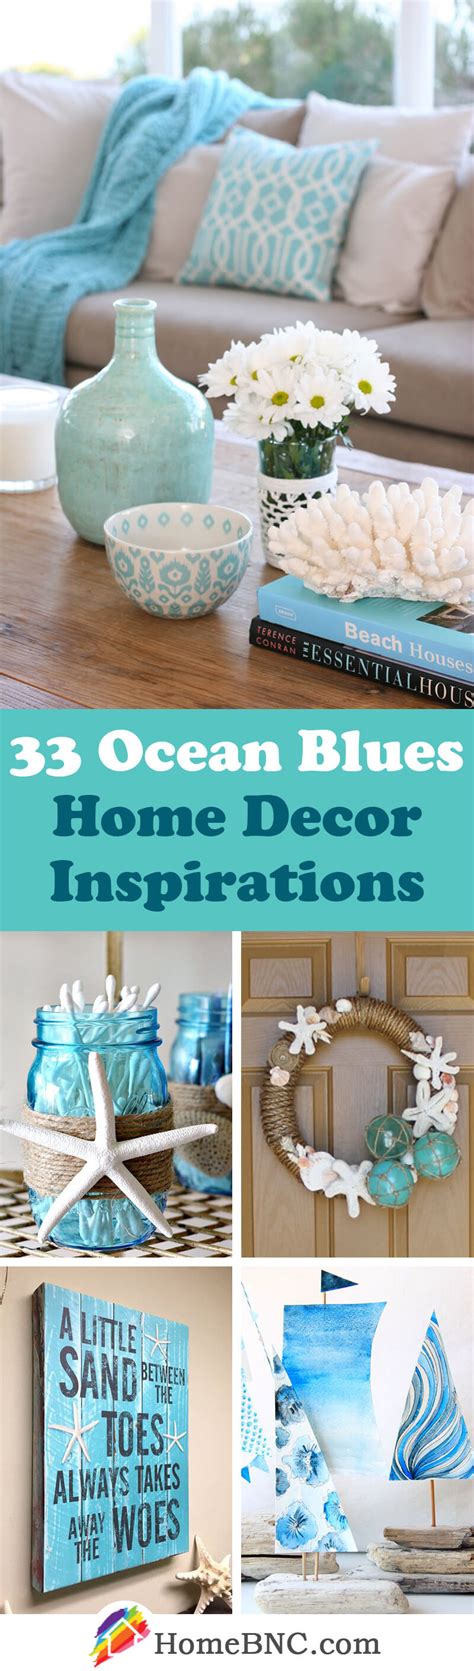 With our wide selection of beach decor and coastal furniture, any house can be a beach house, even if you're nowhere near the gently lapping waves of the ocean. 33 Best Ocean Blues Home Decor Inspiration Ideas and ...